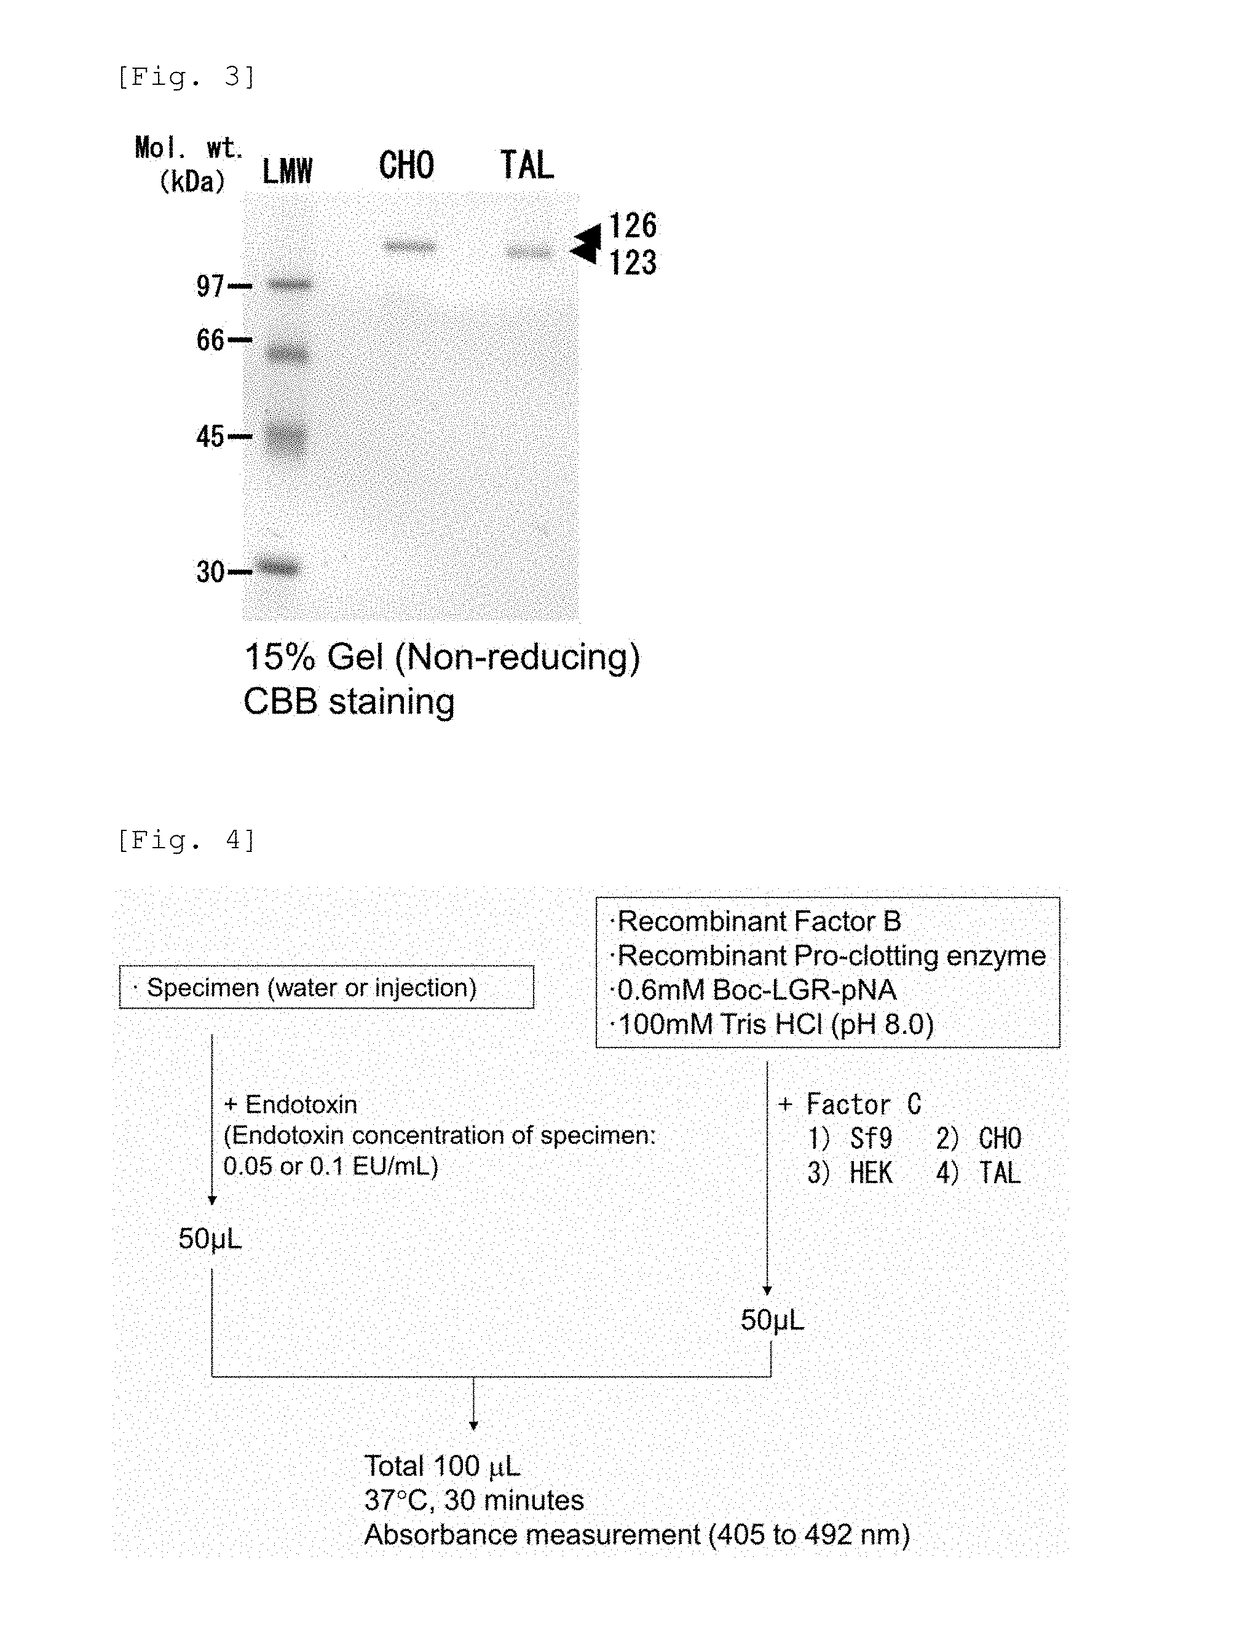 Recombinant Factor C and method for producing the same, and method for measuring endotoxin